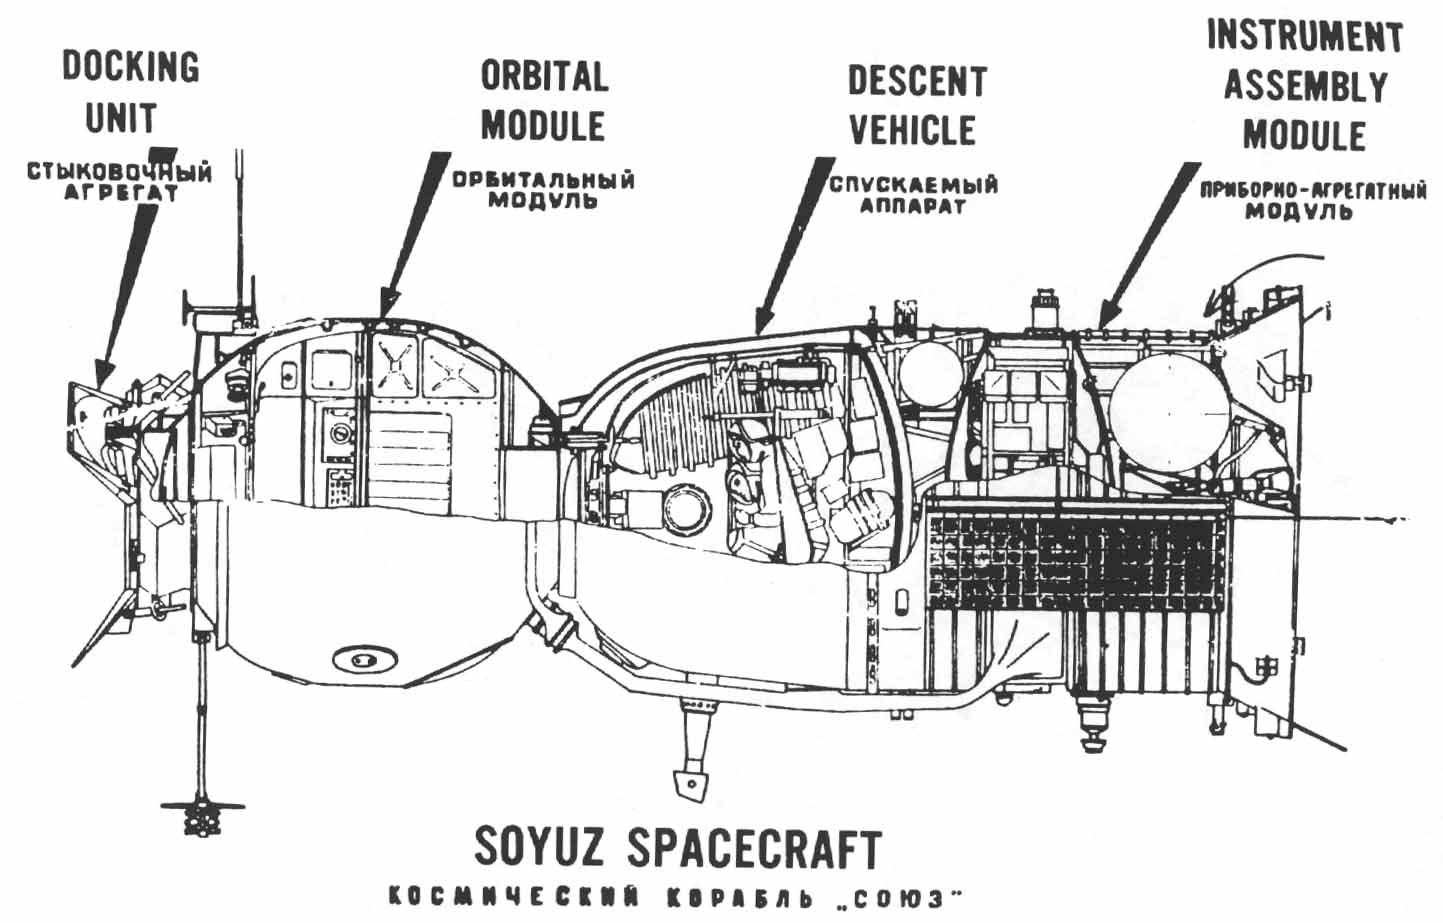 cross-sectional drawing of the Soyuz spacecraft